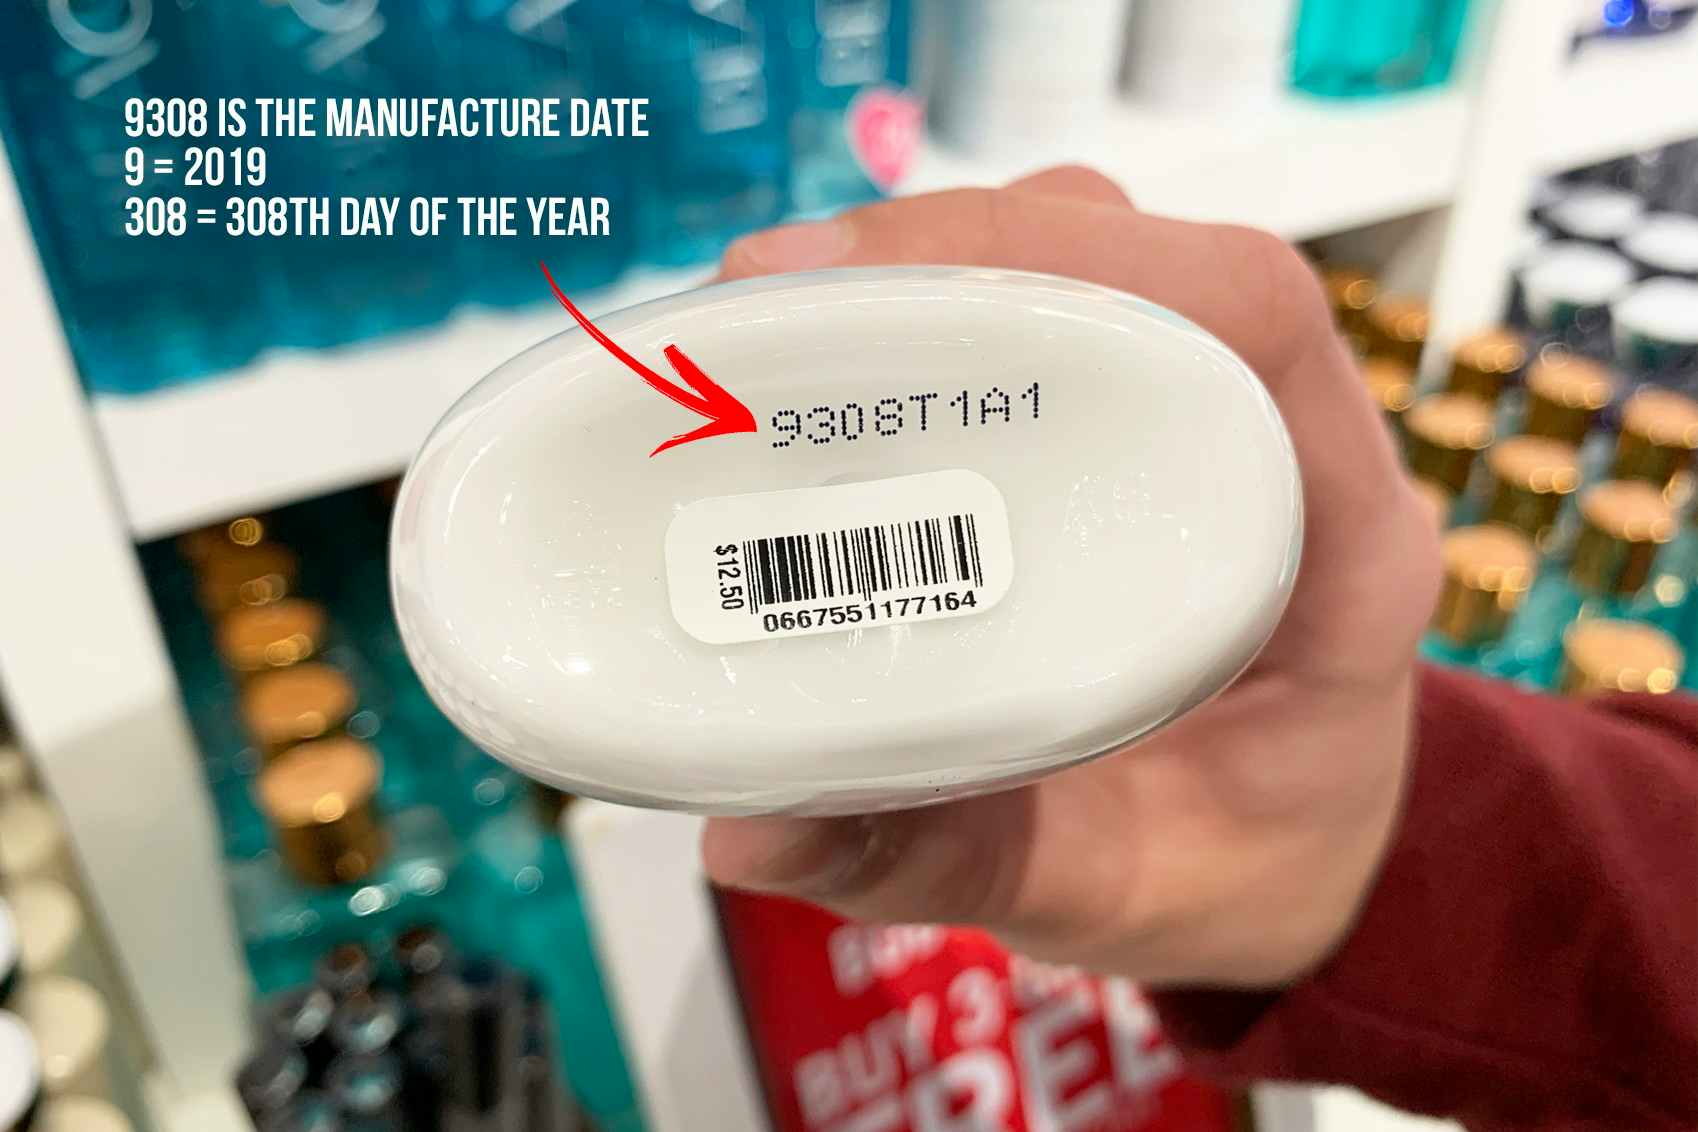 A Bath and Body Works bottle with a code printed on the bottom that reads 9308T1A1 and some added text explaining the code that says, "9308 is the Manufacture date, 9 = 2019, 308 = 308th day of the year